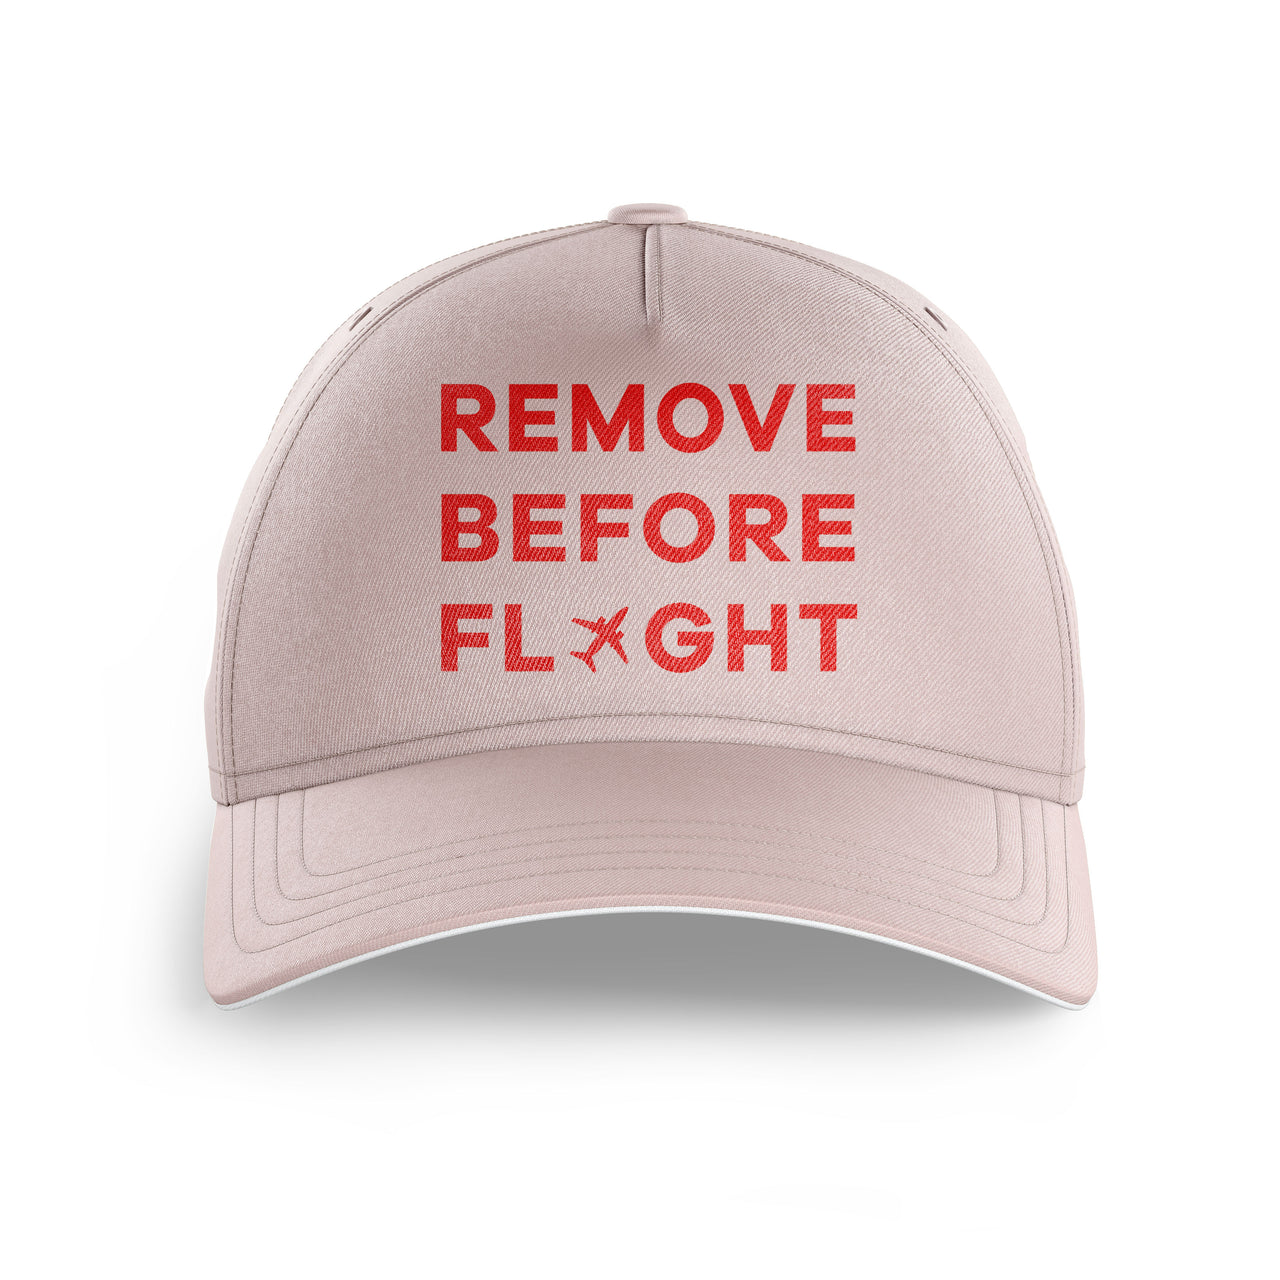 Remove Before Flight Printed Hats